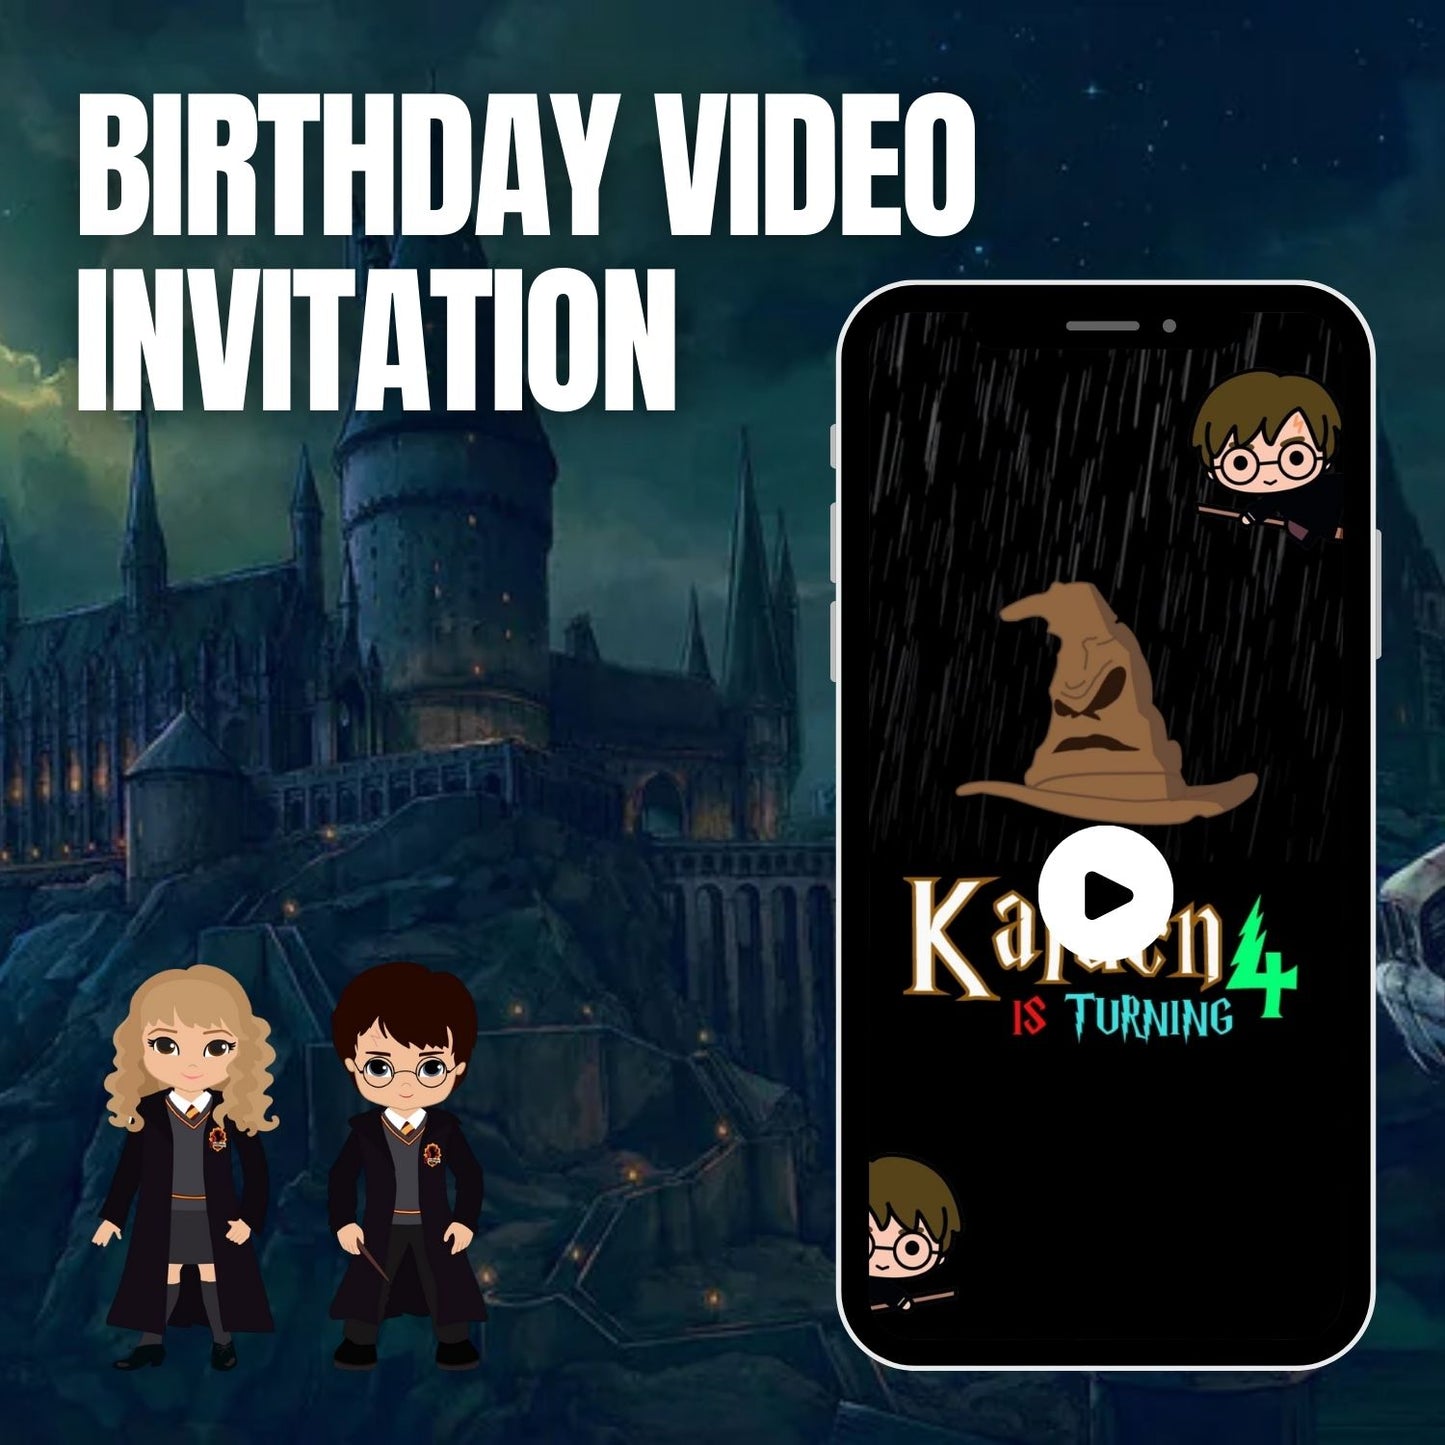 Magical Harry Potter Birthday Video Invitation | Animated Wizard Party Invite